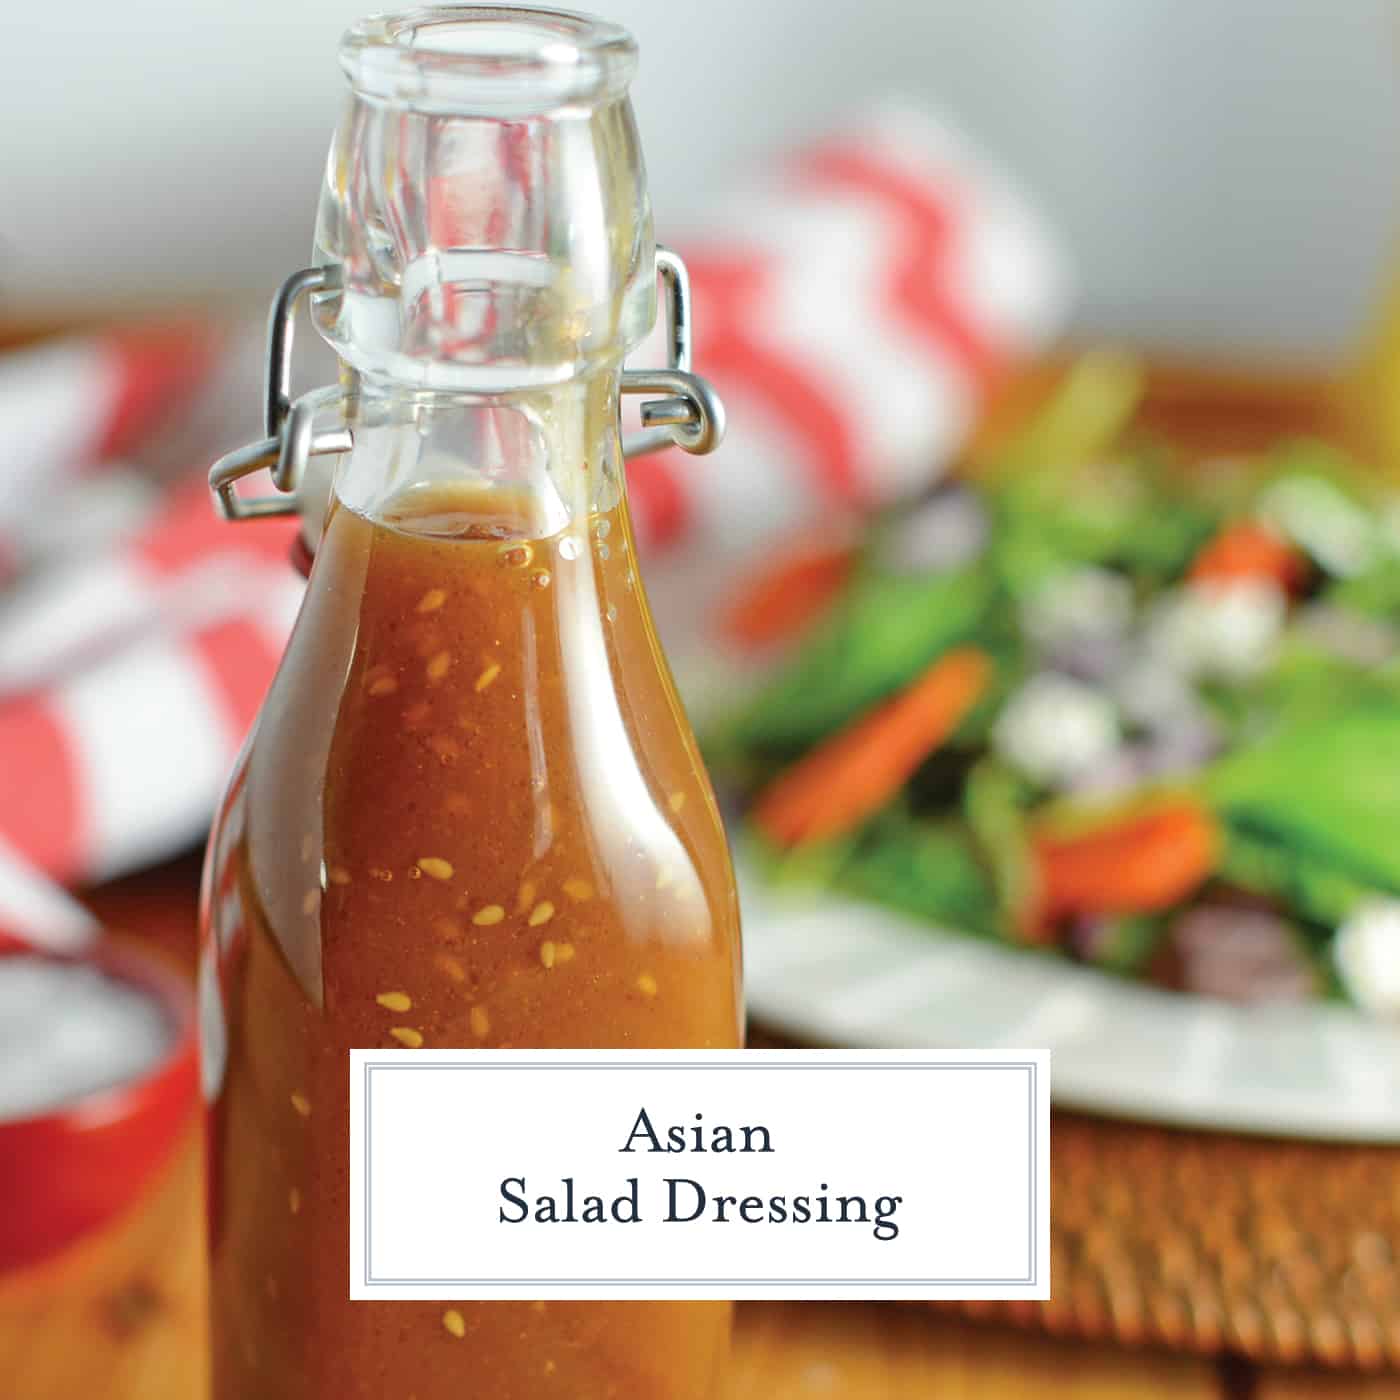 This Asian Salad Dressing is a great copycat recipe for what you get at Japanese steakhouses like Benihana or Kobe! It's a sweet ginger and sesame combination! #asiansaladdressing #gingersaladdressing #japanesesaladdressing www.savoryexperiments.com